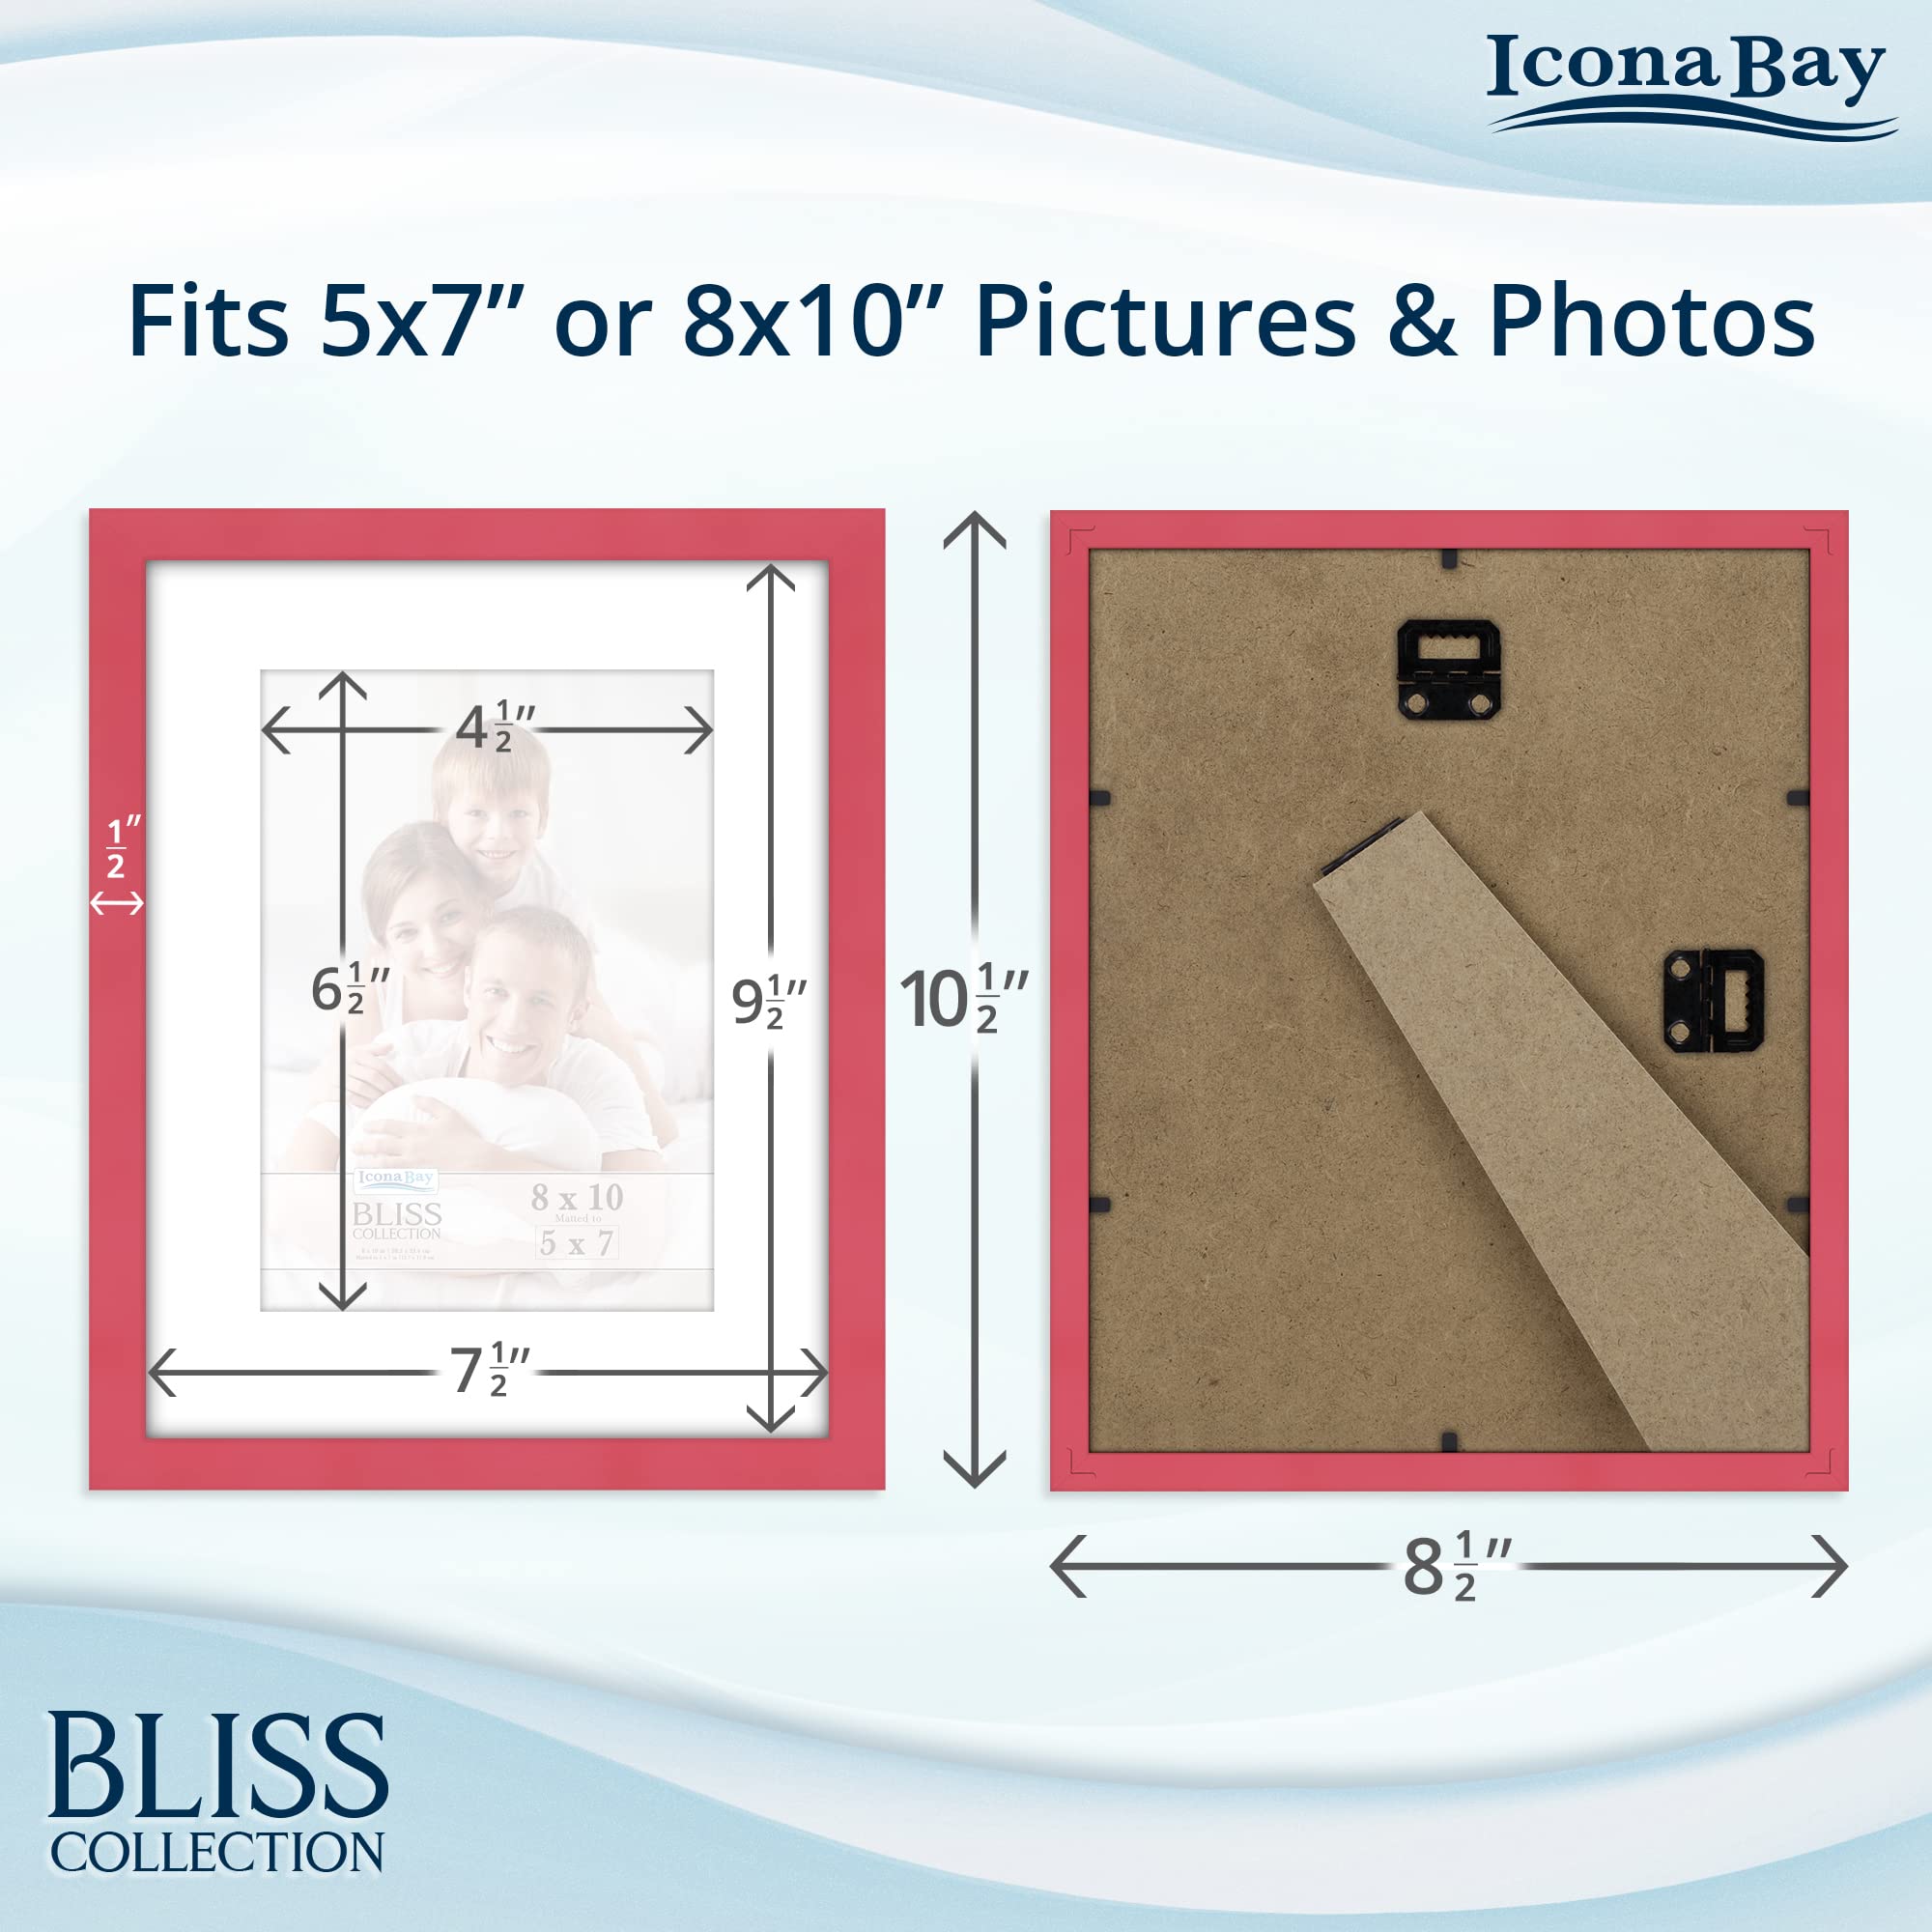 Icona Bay 8x10 Picture Frames with Removable Mat for 5x7 Photos (Red, 5 Pack), Modern Style Wood Composite Frames, Table Top or Wall Mount, Bliss Collection